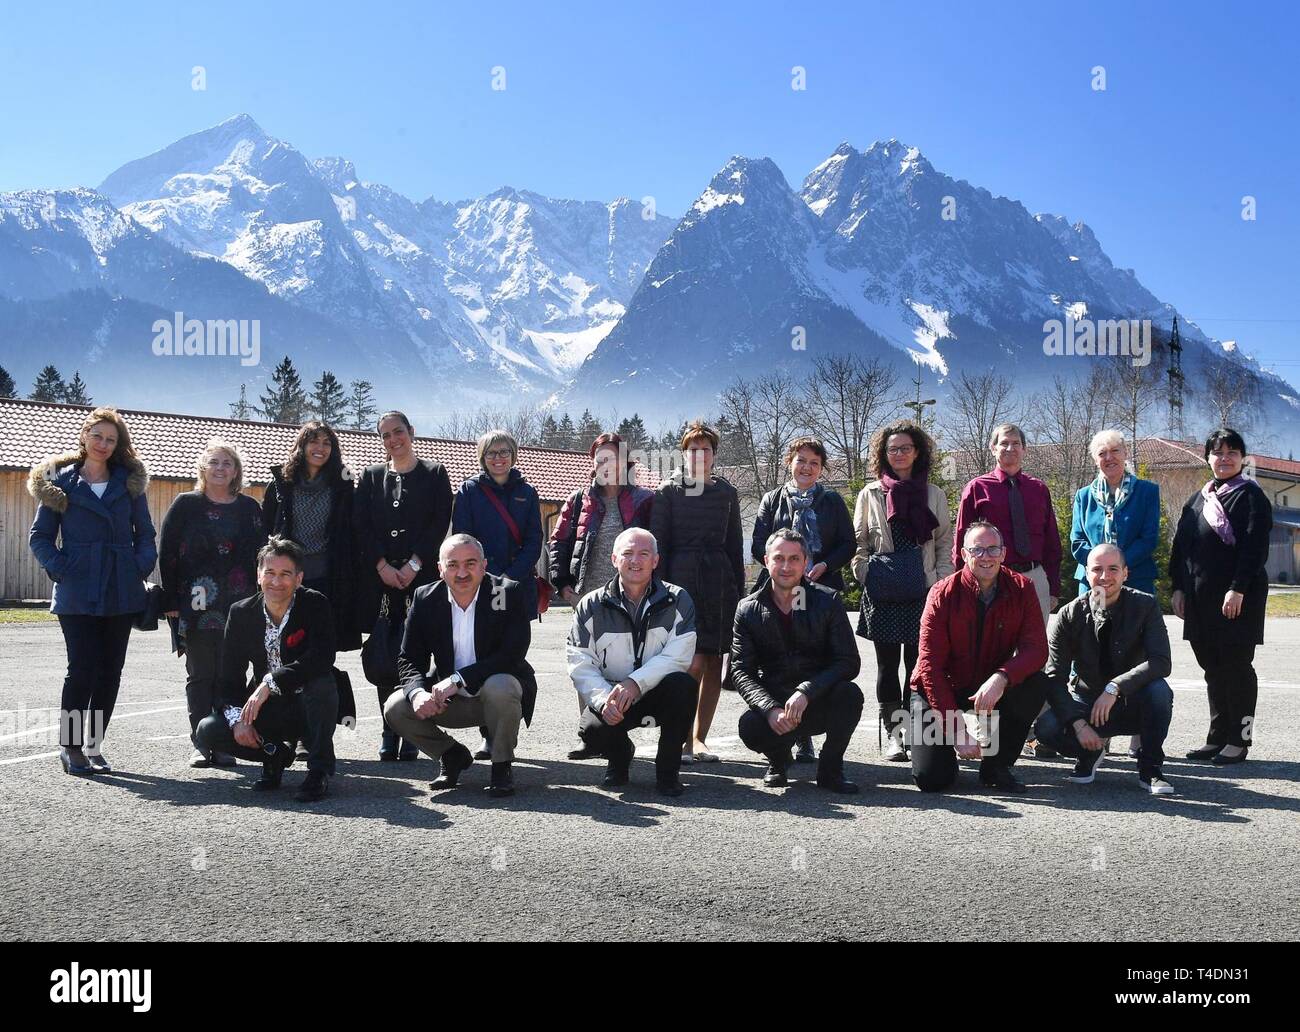 GARMISCH-PARTENKIRCHEN, Germany (March 19, 2019) – Thirteen international language proficiency testers from NATO and partner nations graduate from the Partner Language Training Center Europe’s Advanced Language Testing Seminar April 5 at the George C. Marshall European Center for Security Studies based here. (DOD Stock Photo